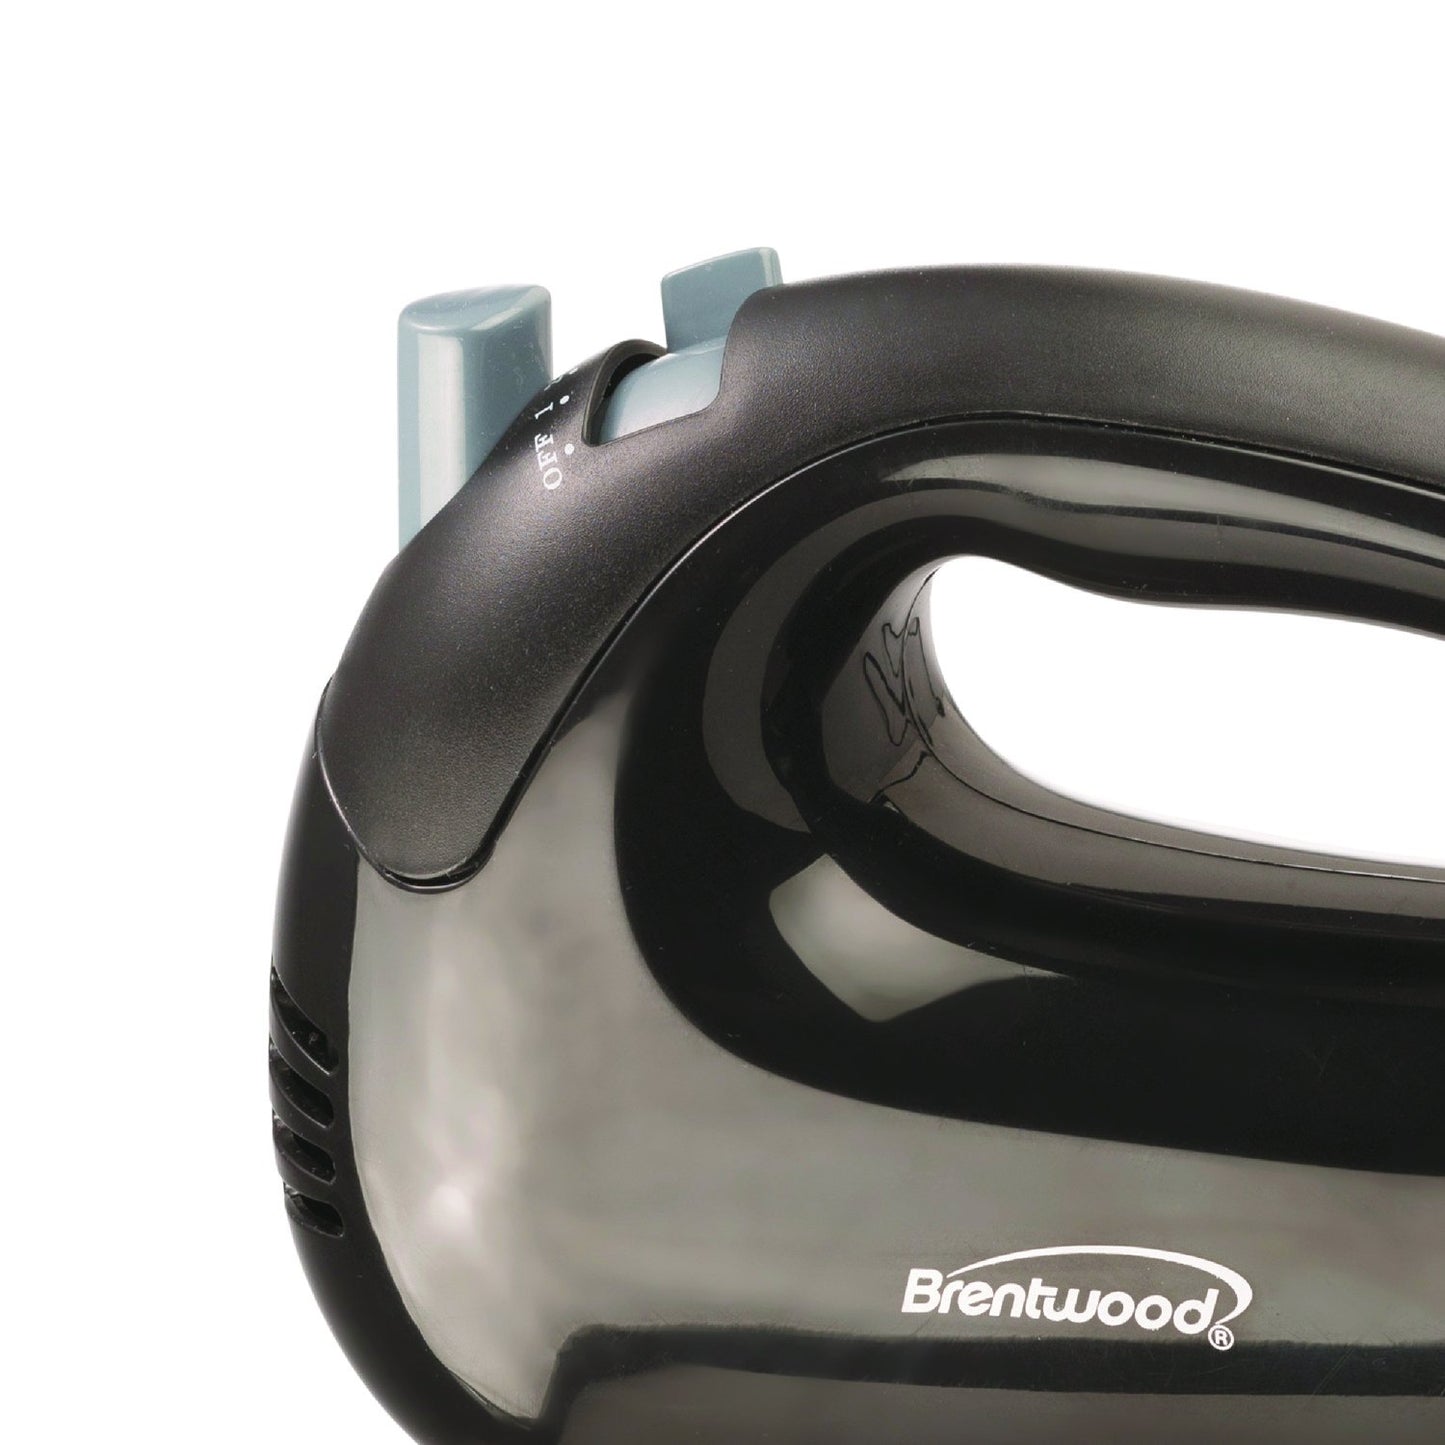 Brentwood Appliances HM-44 5-Speed Electric Hand Mixer (Black)